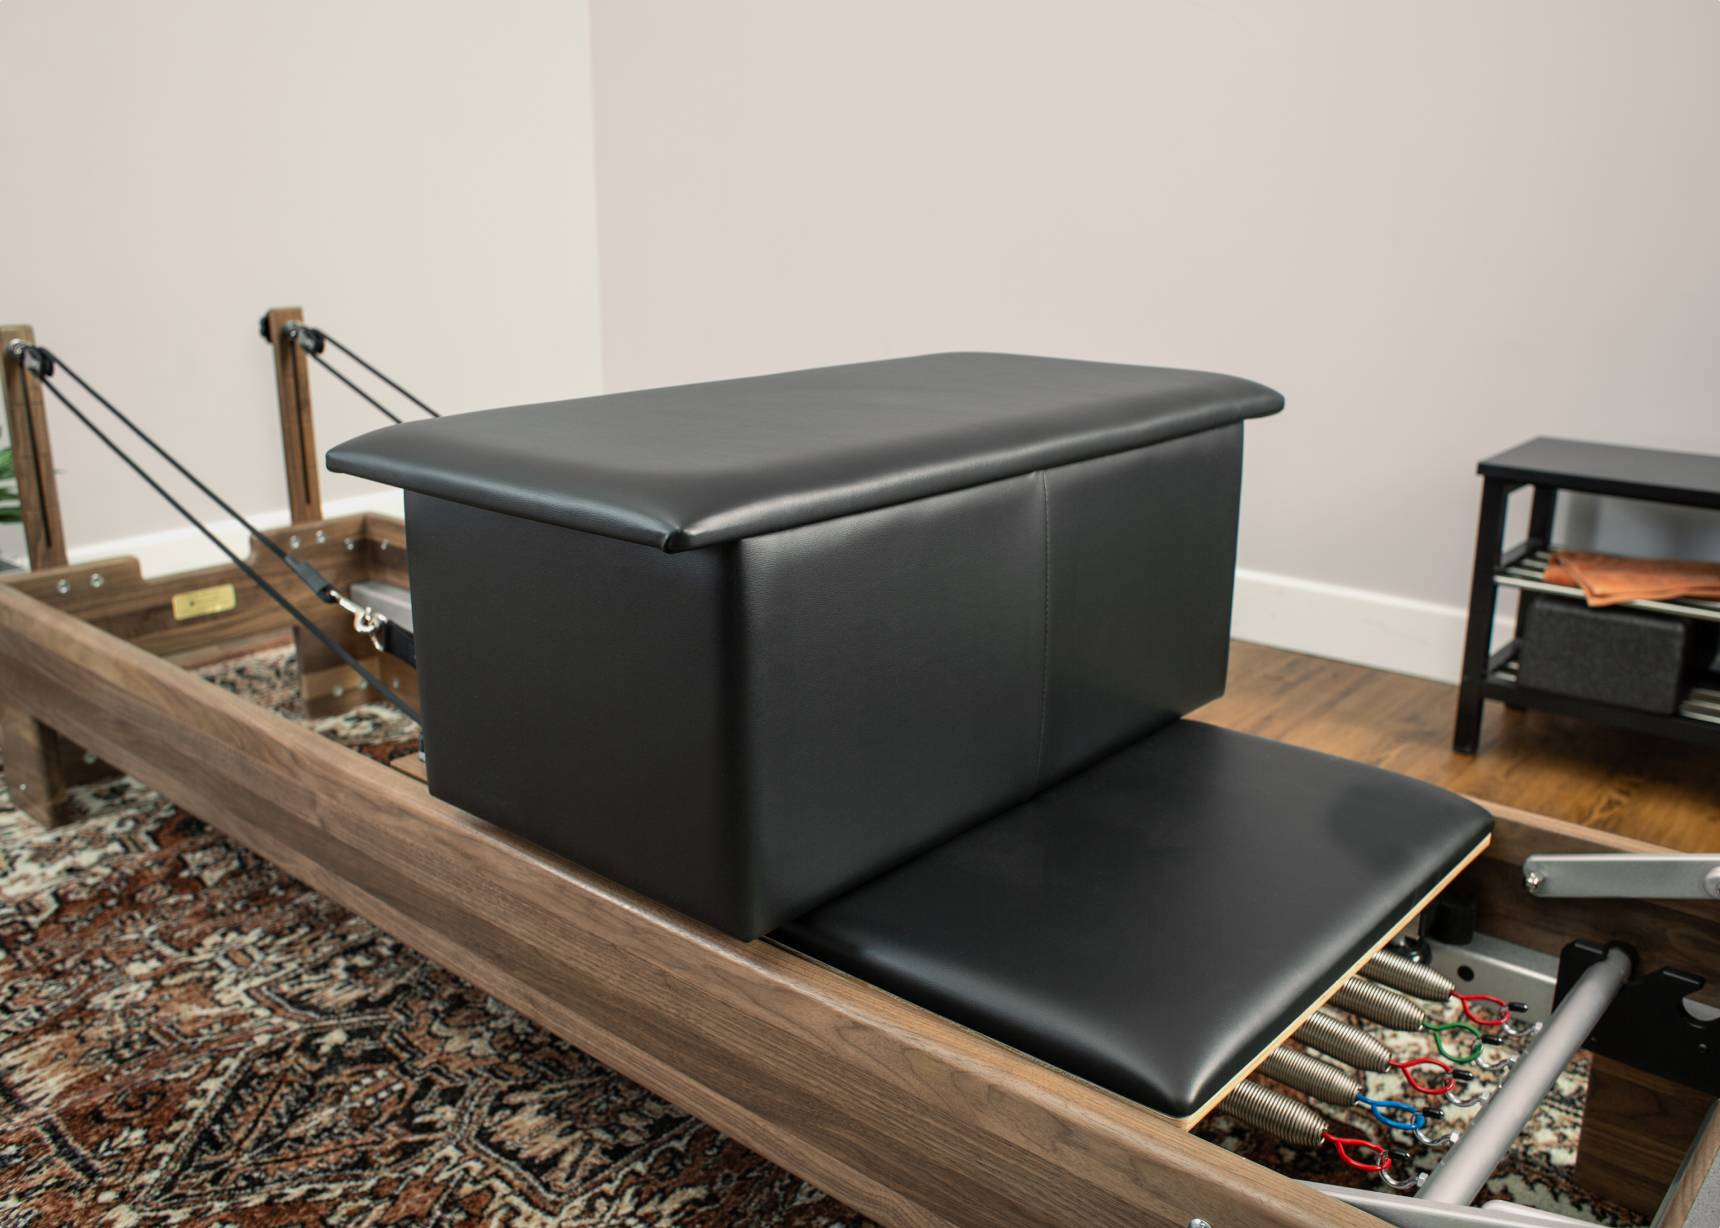 The large sitting box can be used alone or with other Pilates equipment to enhance your practice